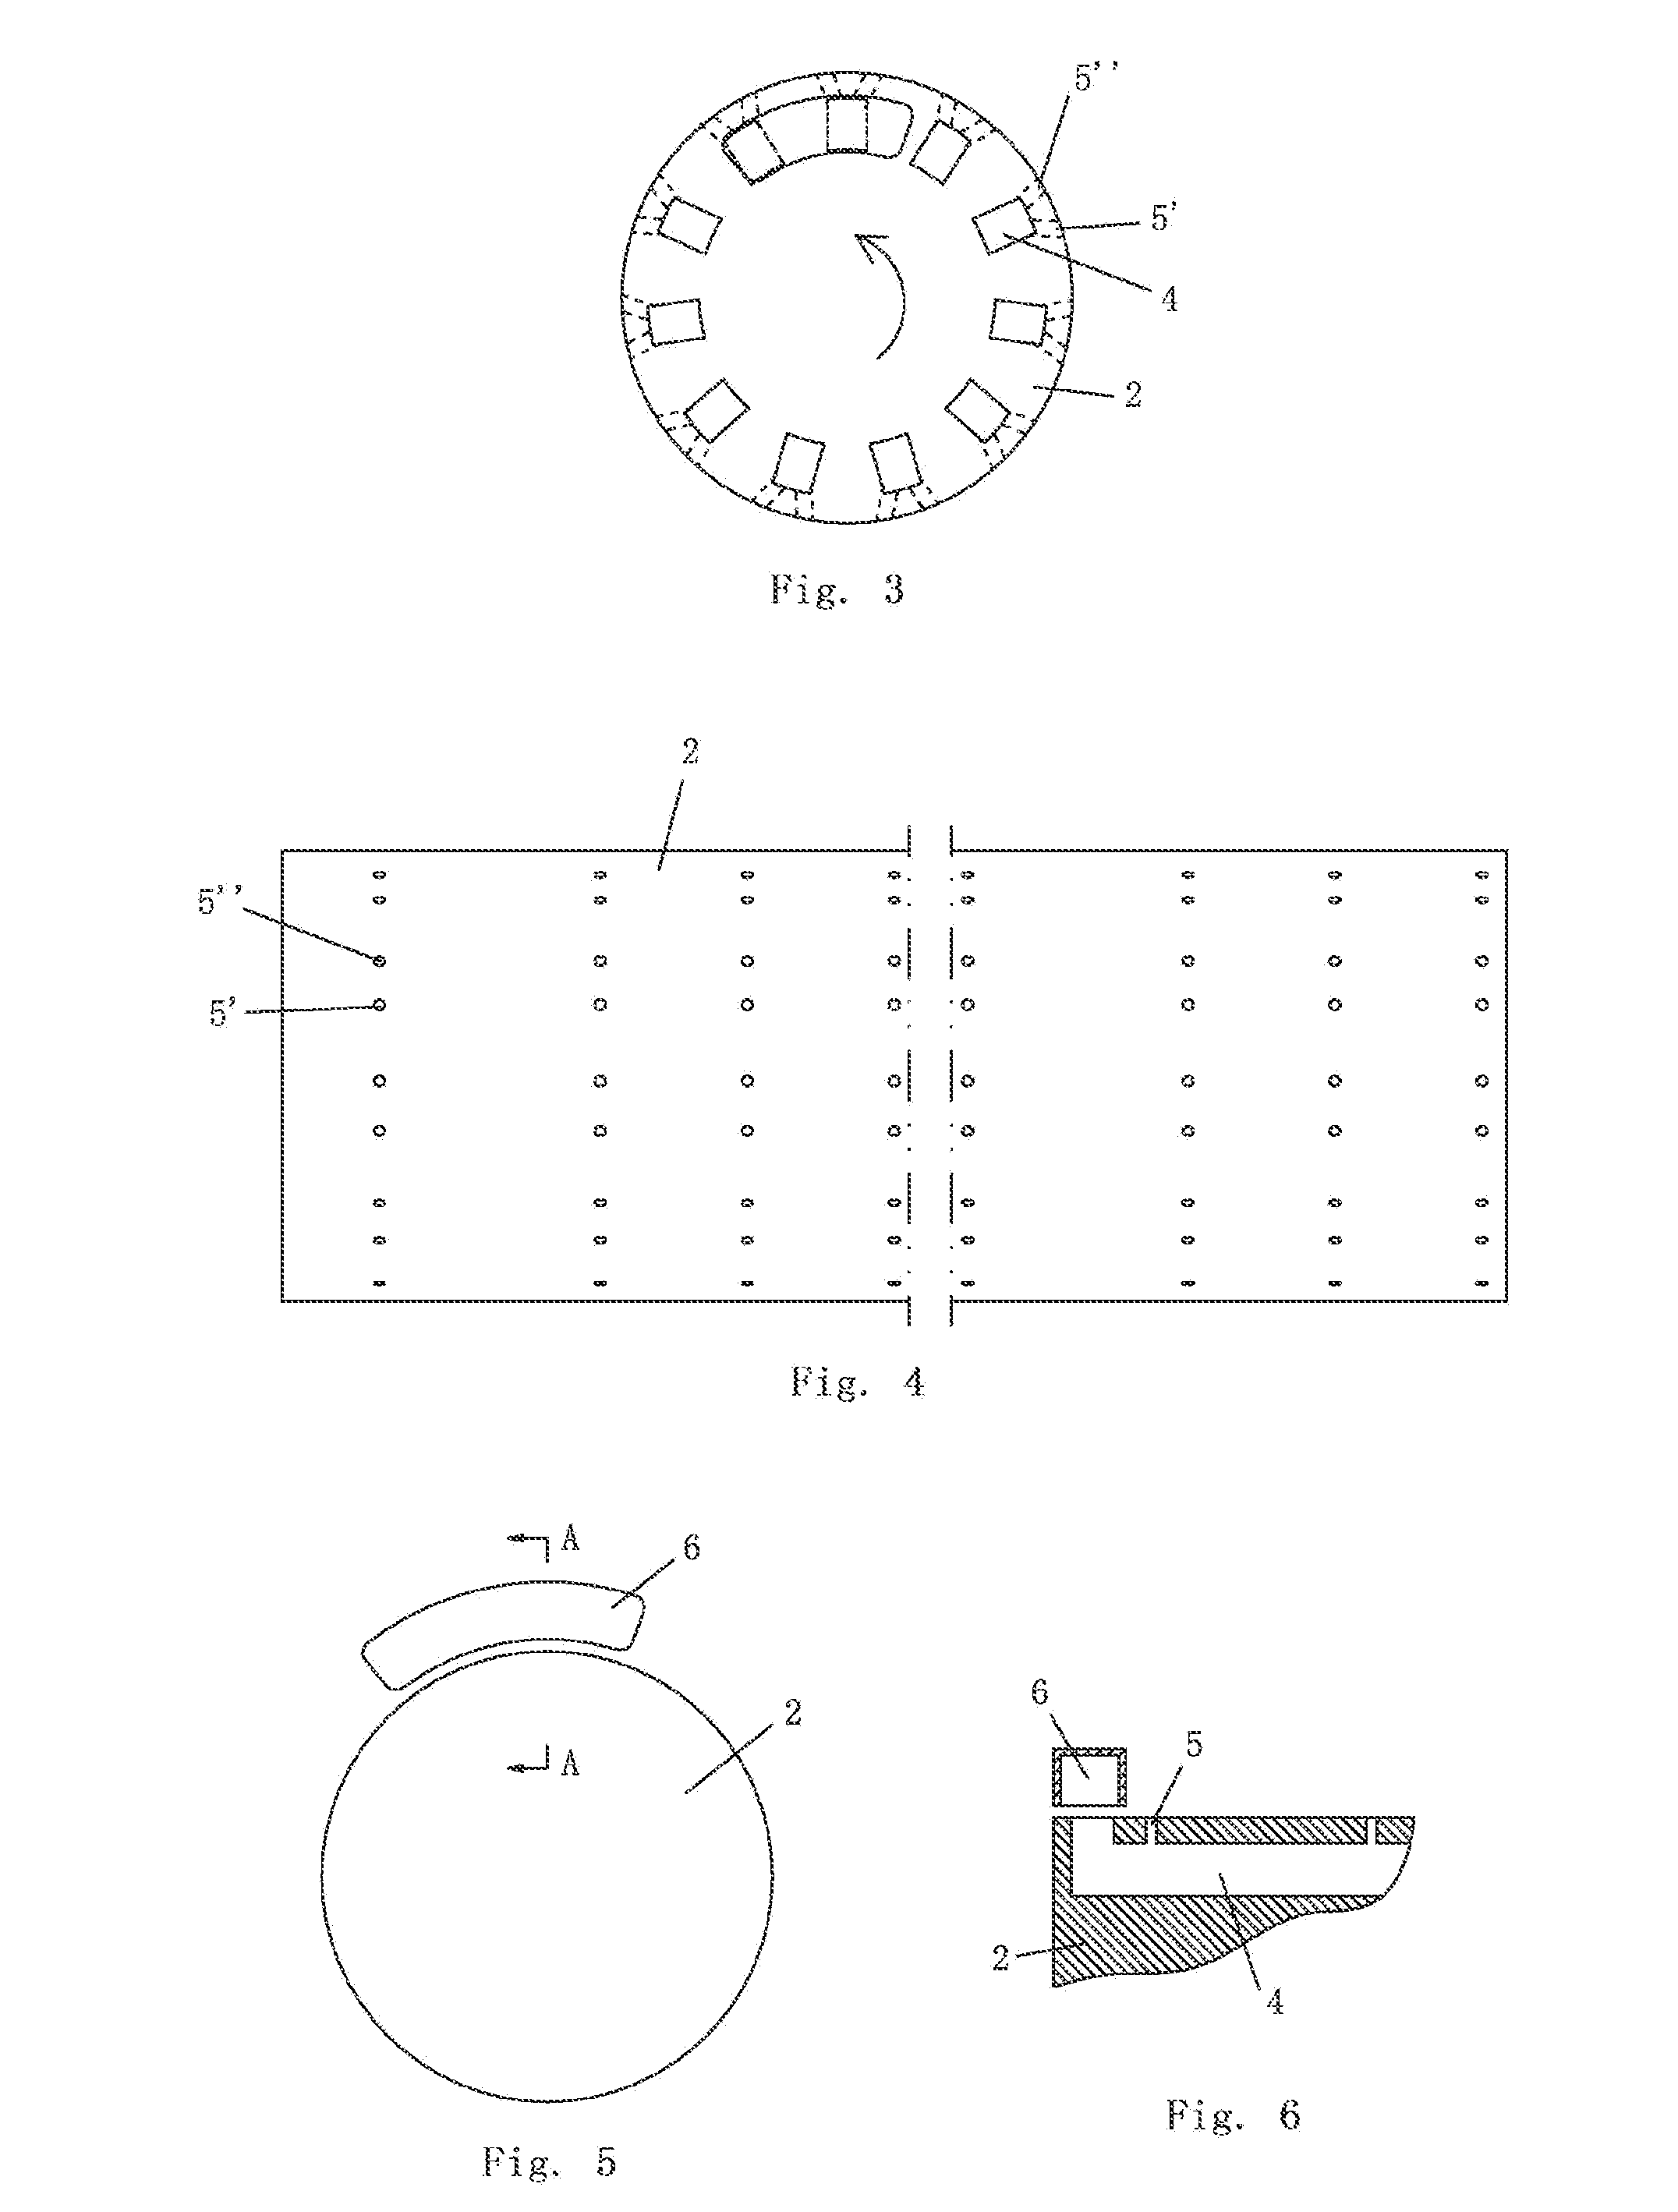 Coreless paper roll rewinding machine without a winding assisting plate